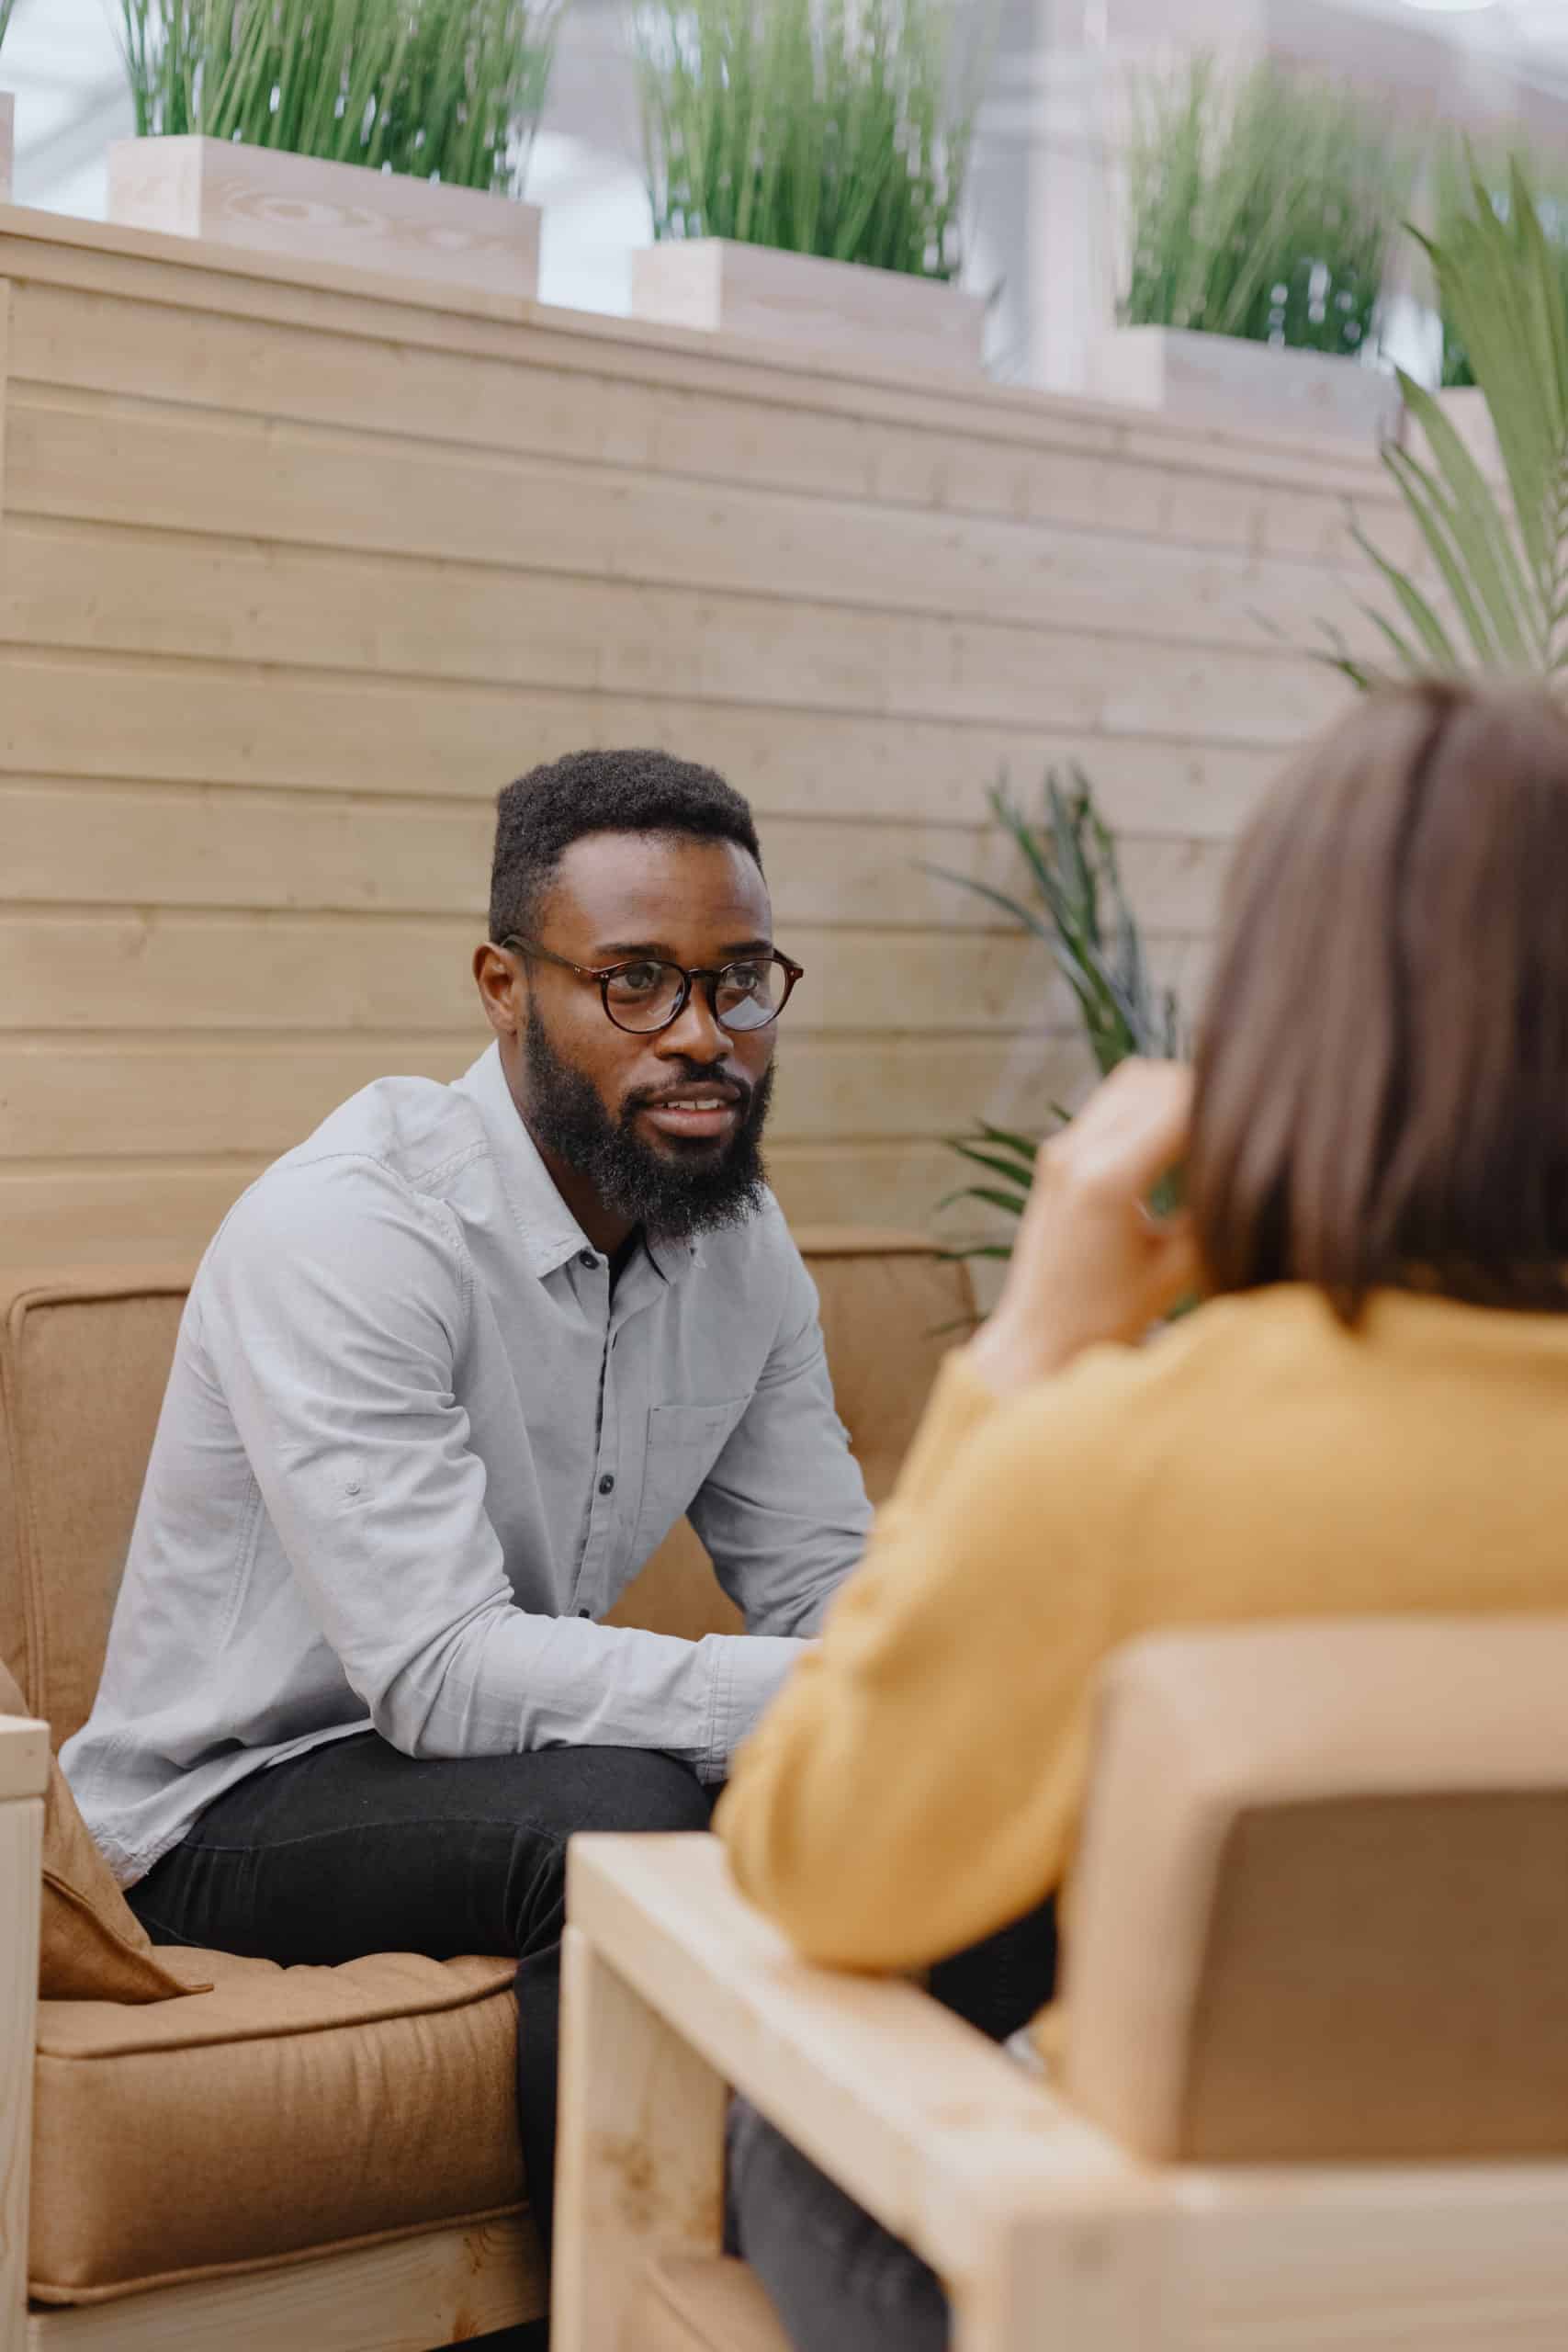 male psychologist conducts a patient's appointment in an office or a medical center. African American male HR conducts an interview of hiring a European woman